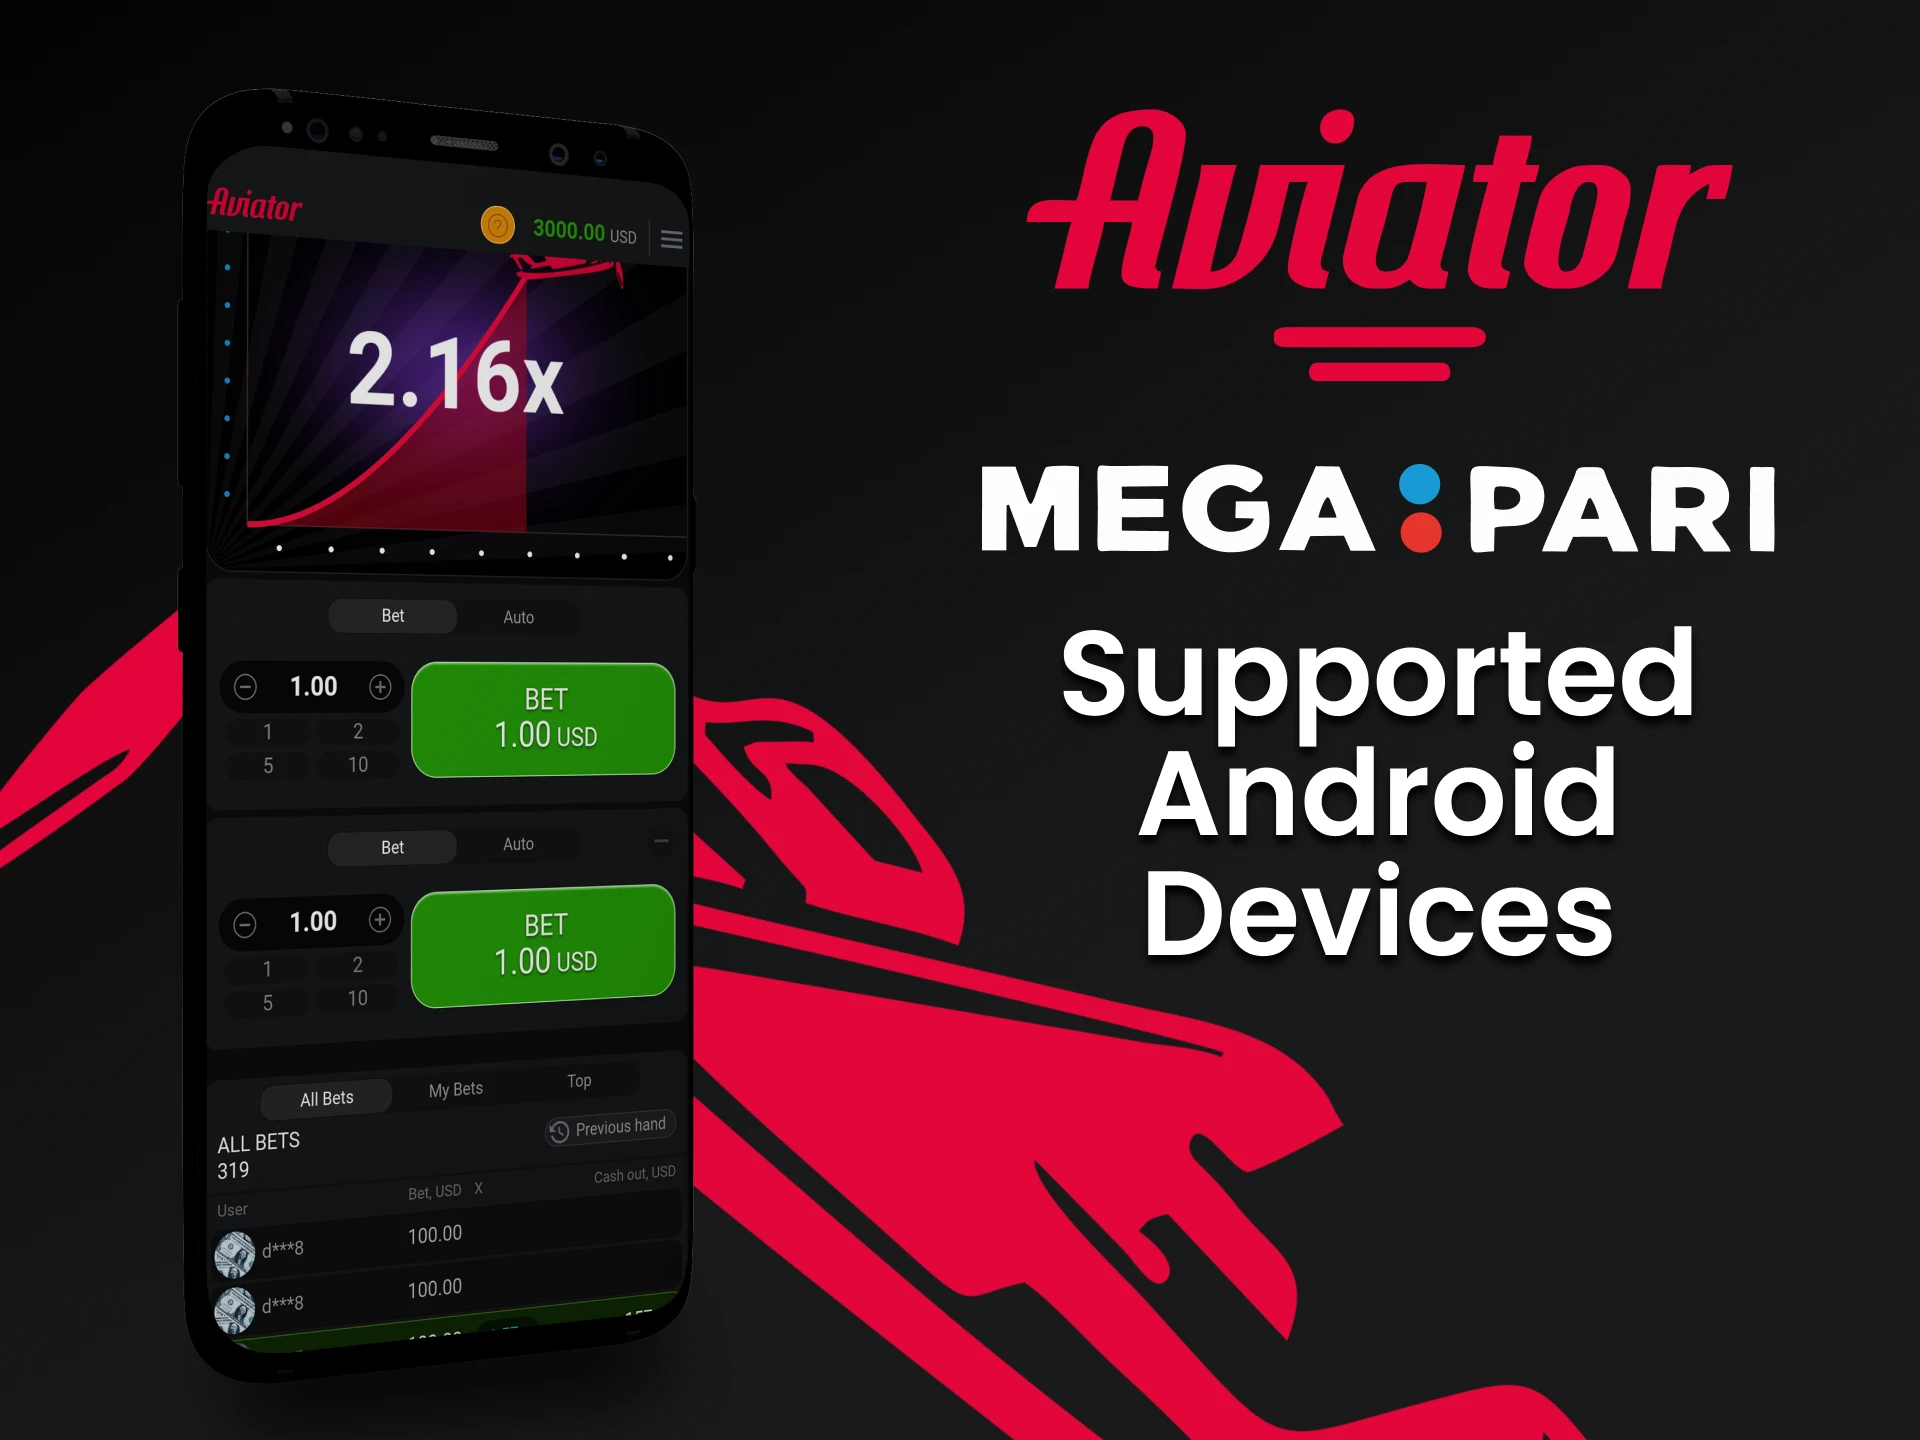 To play Aviator, use the Megapari app for Android.